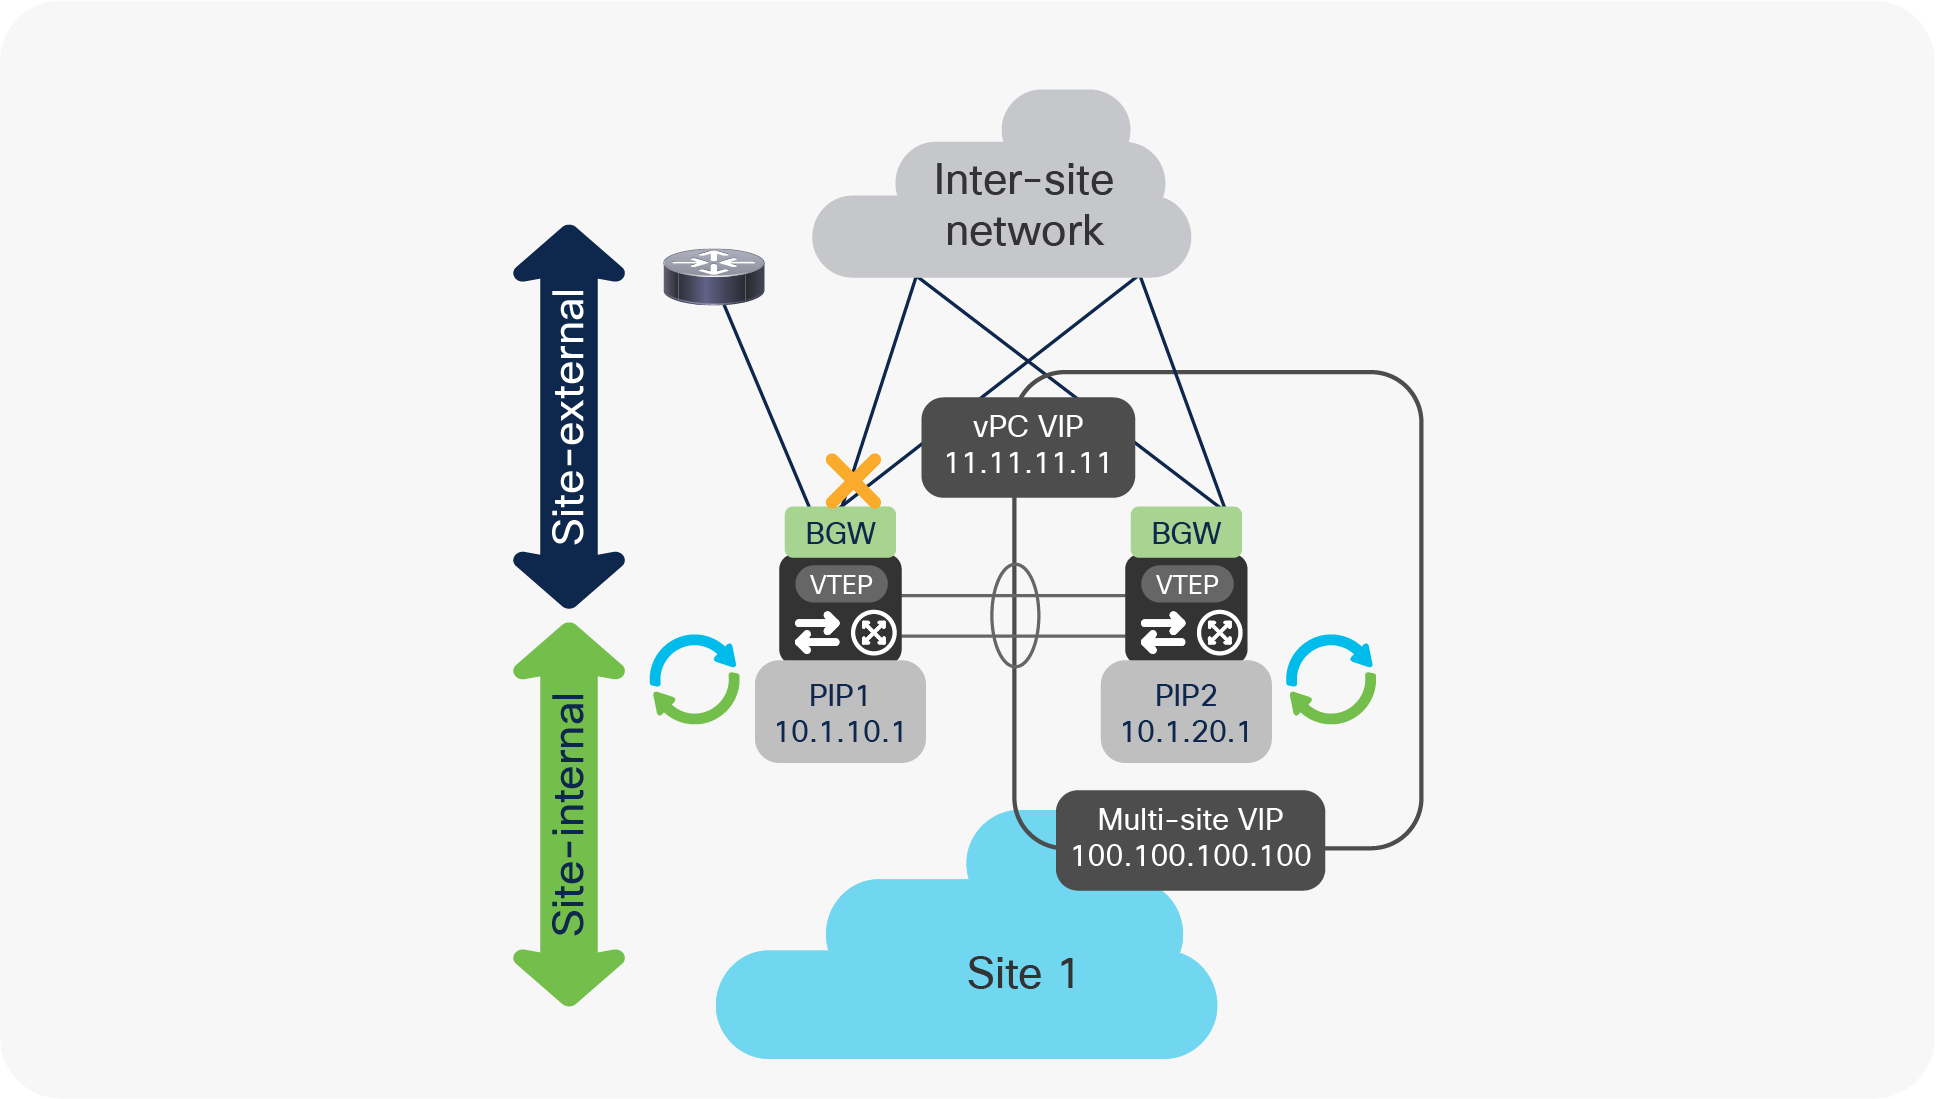 vPC BGW isolation from the site-external network